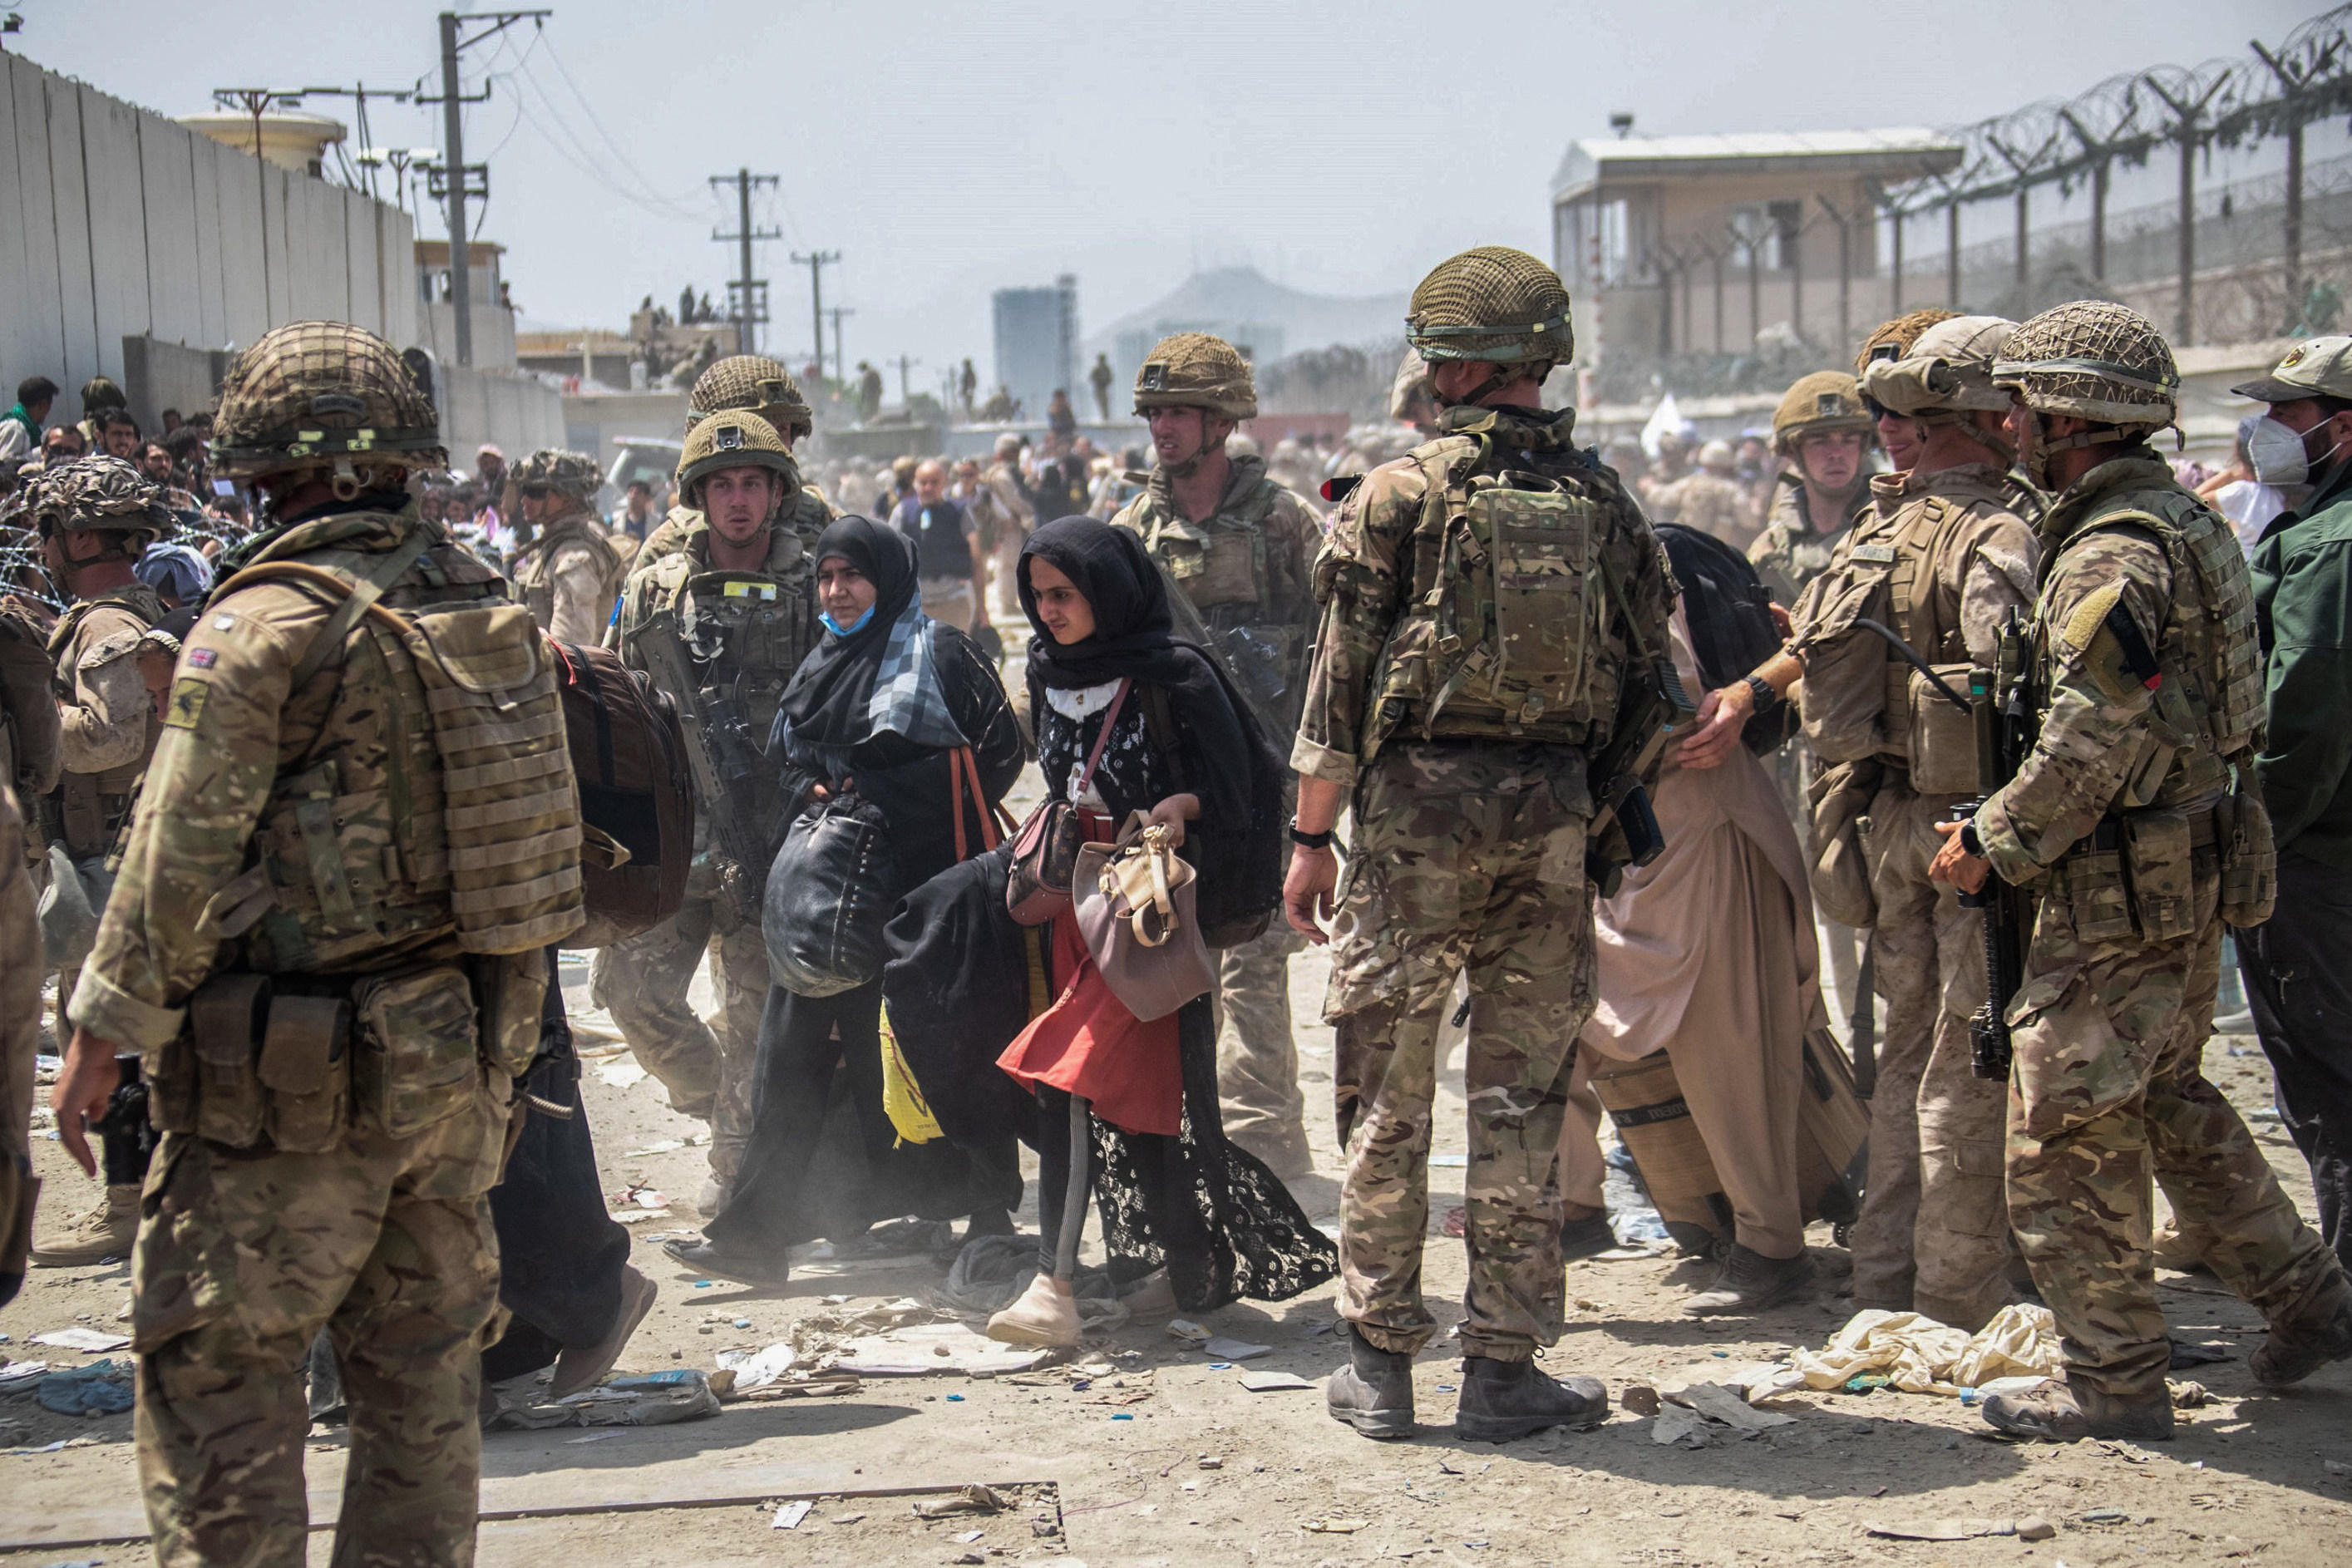 Members of the British and US military take part in the evacuation of personnel from Kabul airport in Afghanistan on August 20. Photo: dpa